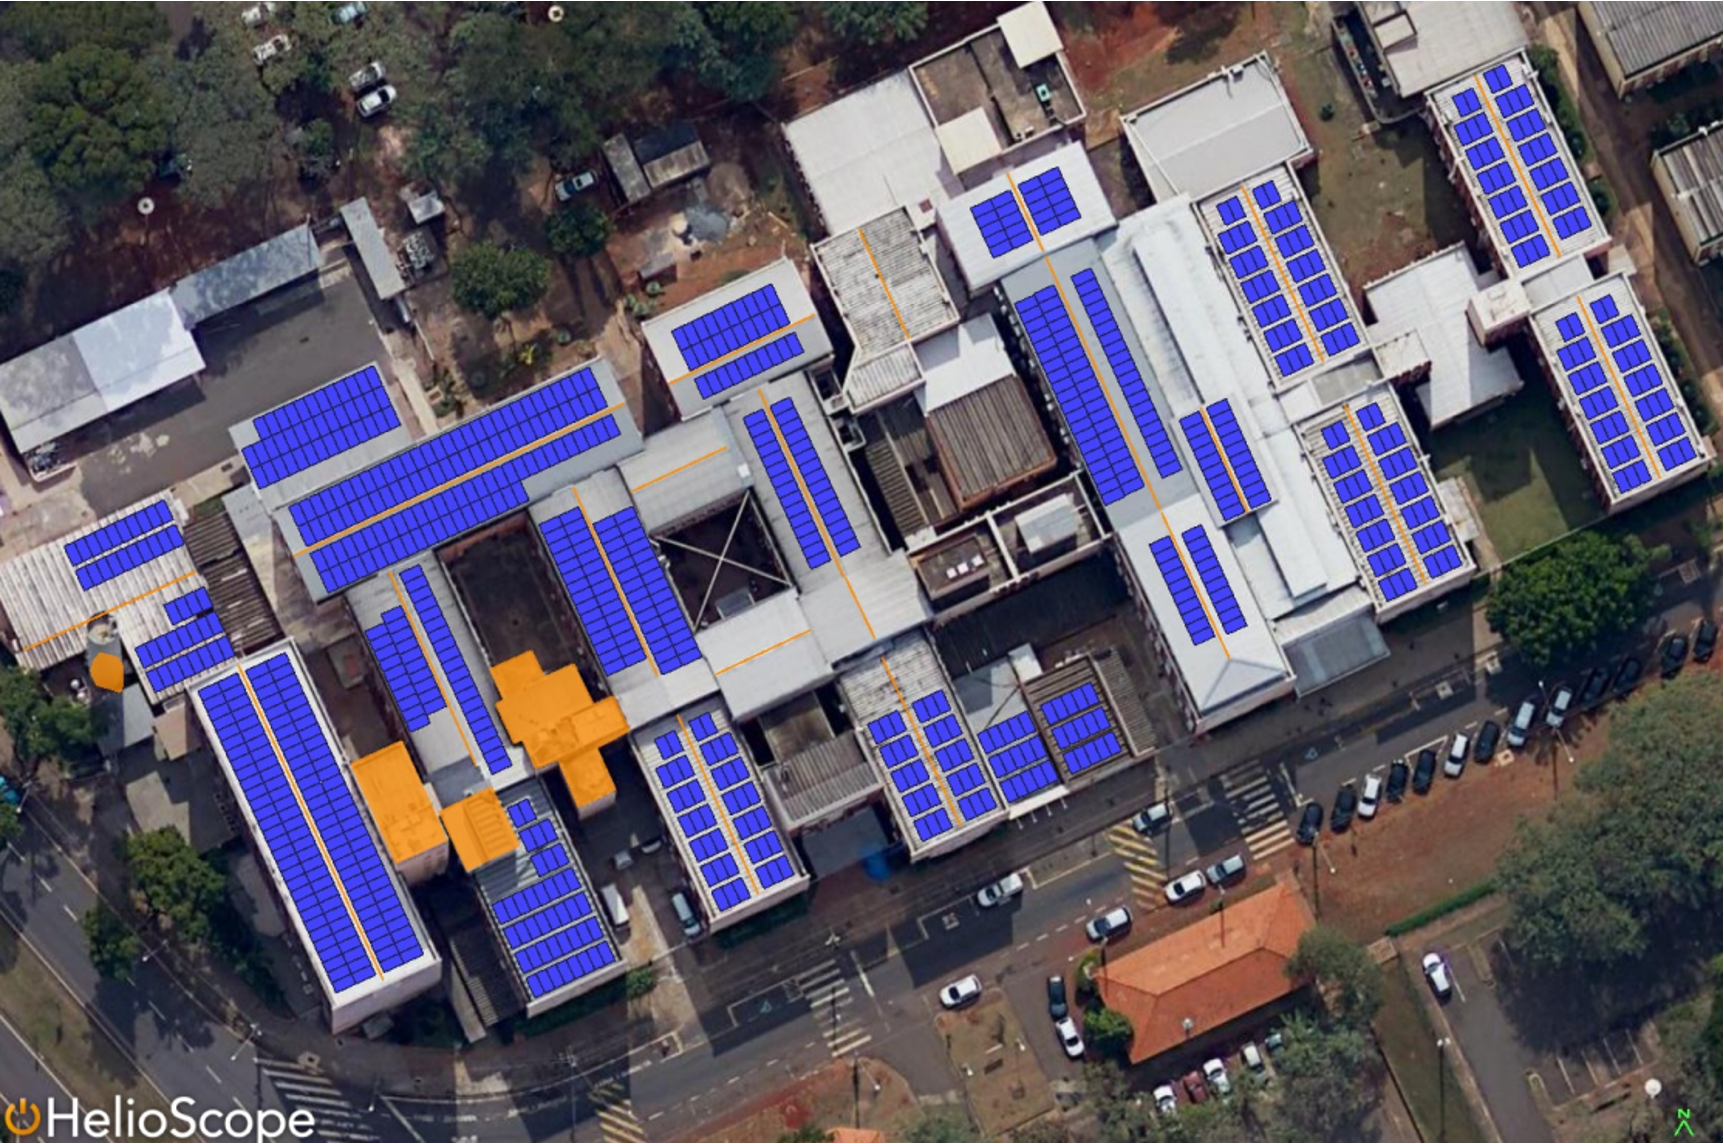 A birds eye view of Unicamp's roofs colored in purple for solar PV roofs